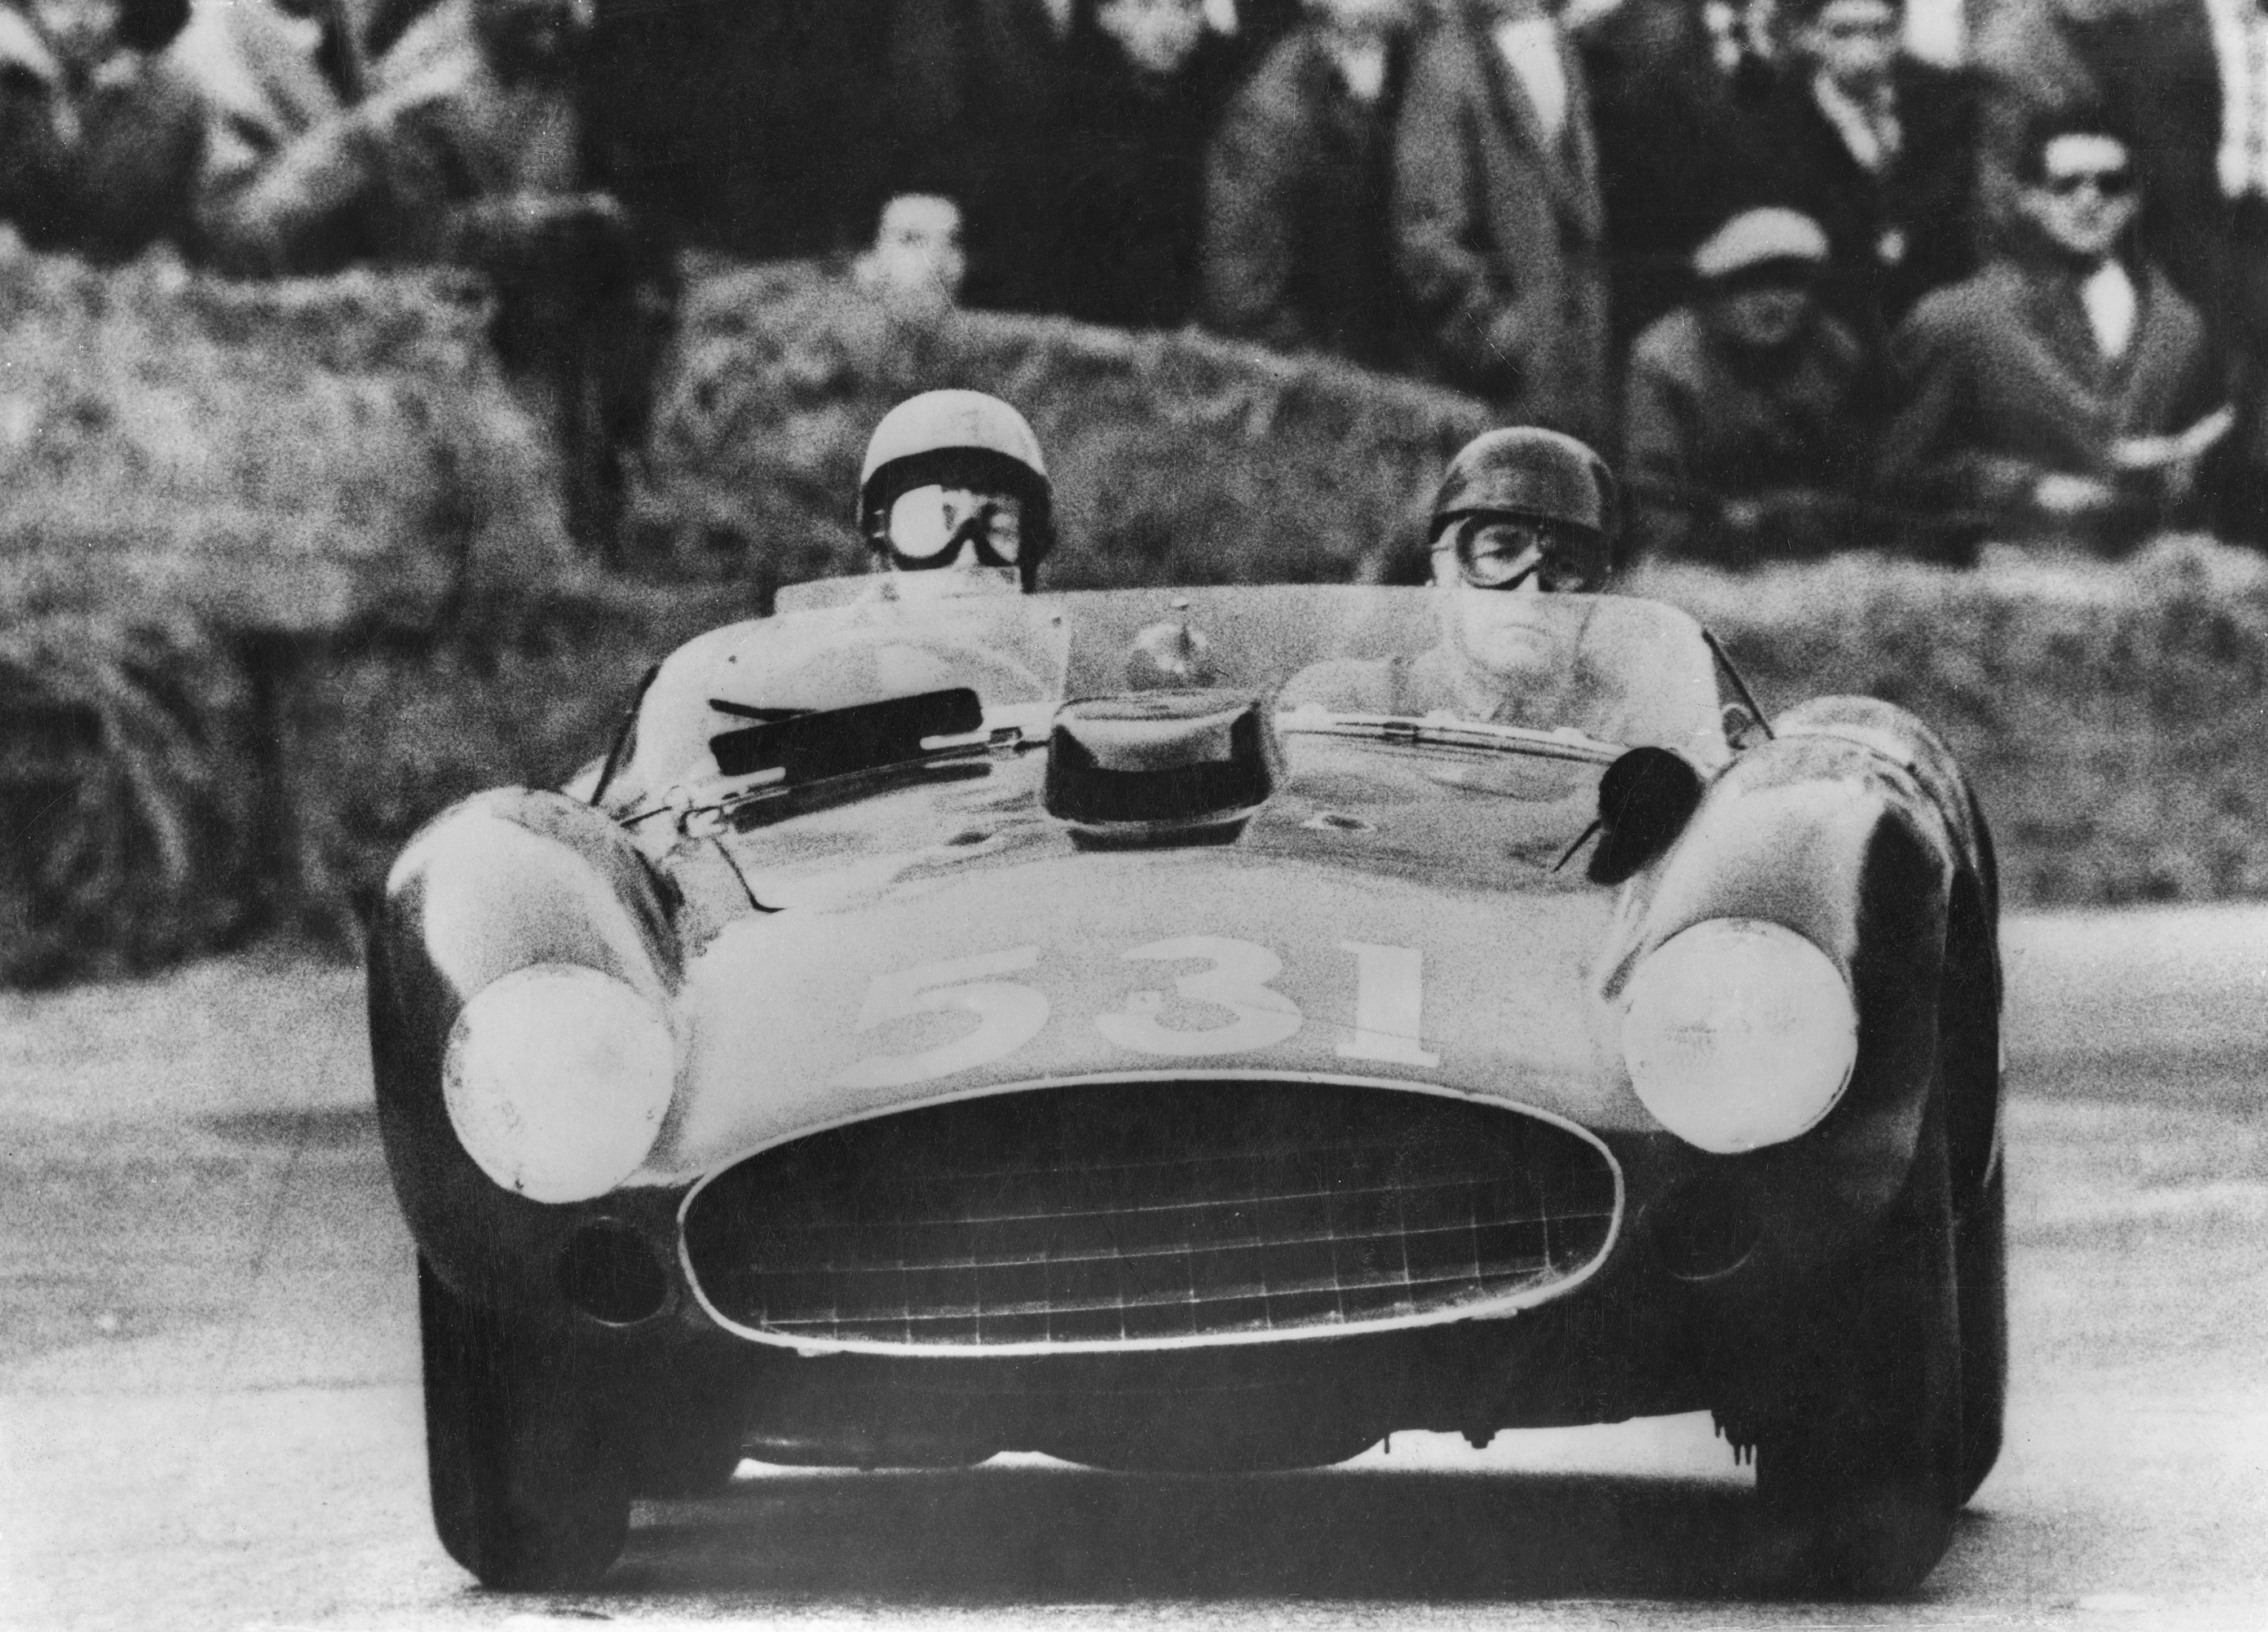 Alfonso de Portago and his co-driver Edmund Nelson in their Ferrari during the Italian Mille Miglia road race in 1957